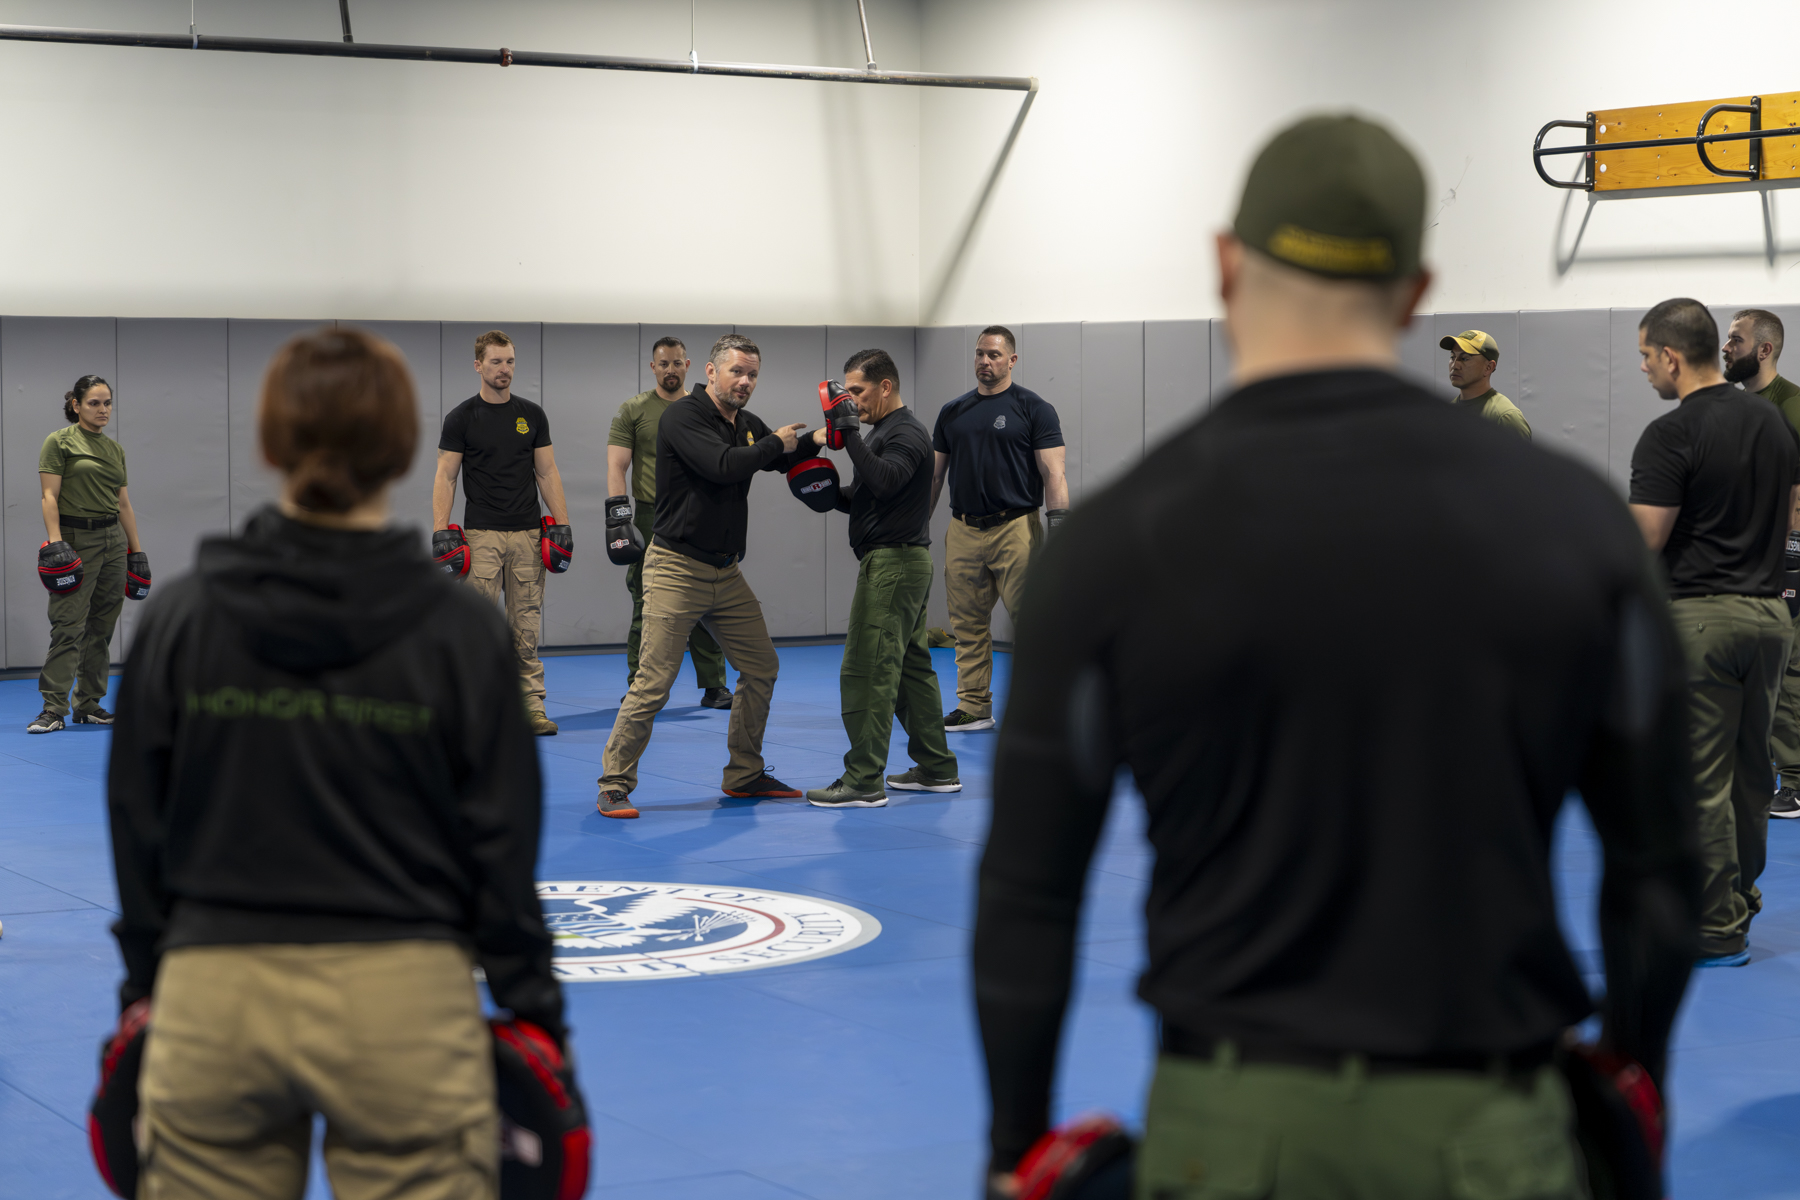 Officers & agents training to become CBP Less-Lethal Instructors and will return to their assigned locations to teach these important skills to others.